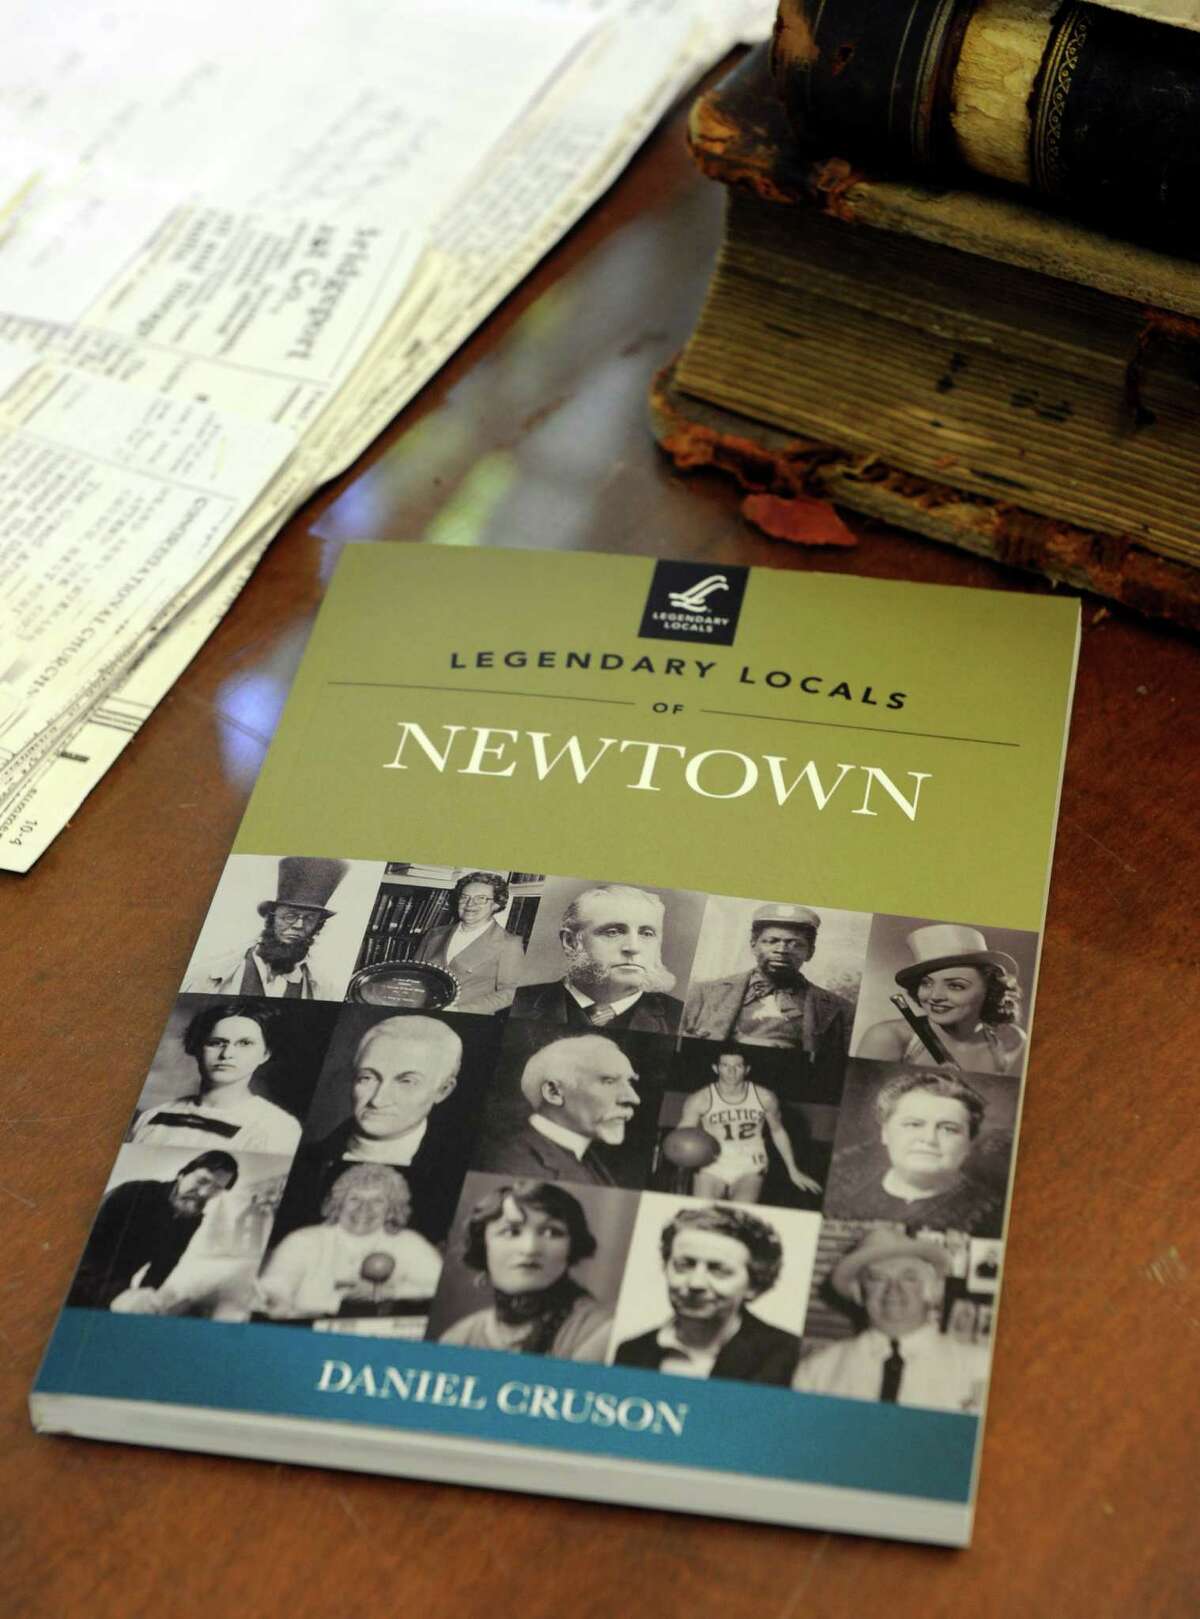 Stories about Newtown's many notable characters are told in historian Dan Cruson's book, "Legendary Locals of Newtown," shown here. On Monday, Jan. 13, Cruson will share some of those stories in a free program presented by the Newtown Historical Society. It will be offered at 7:30 p.m. in the town's Meeting House at 31 Main St.